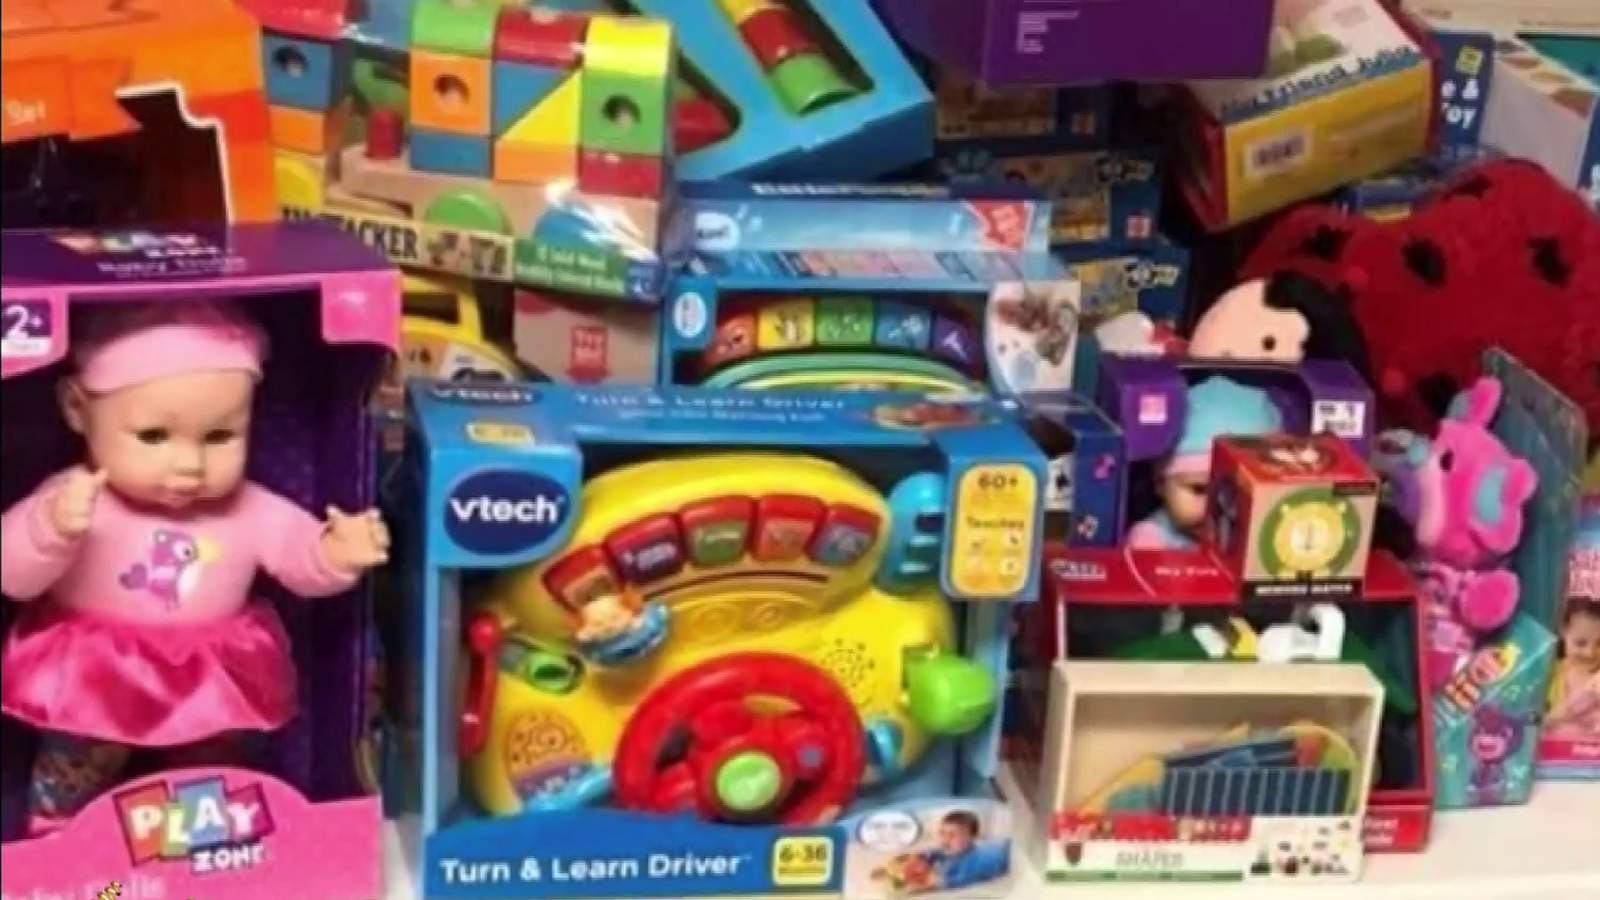 Roanoke groups partnering to collect toys for foster children